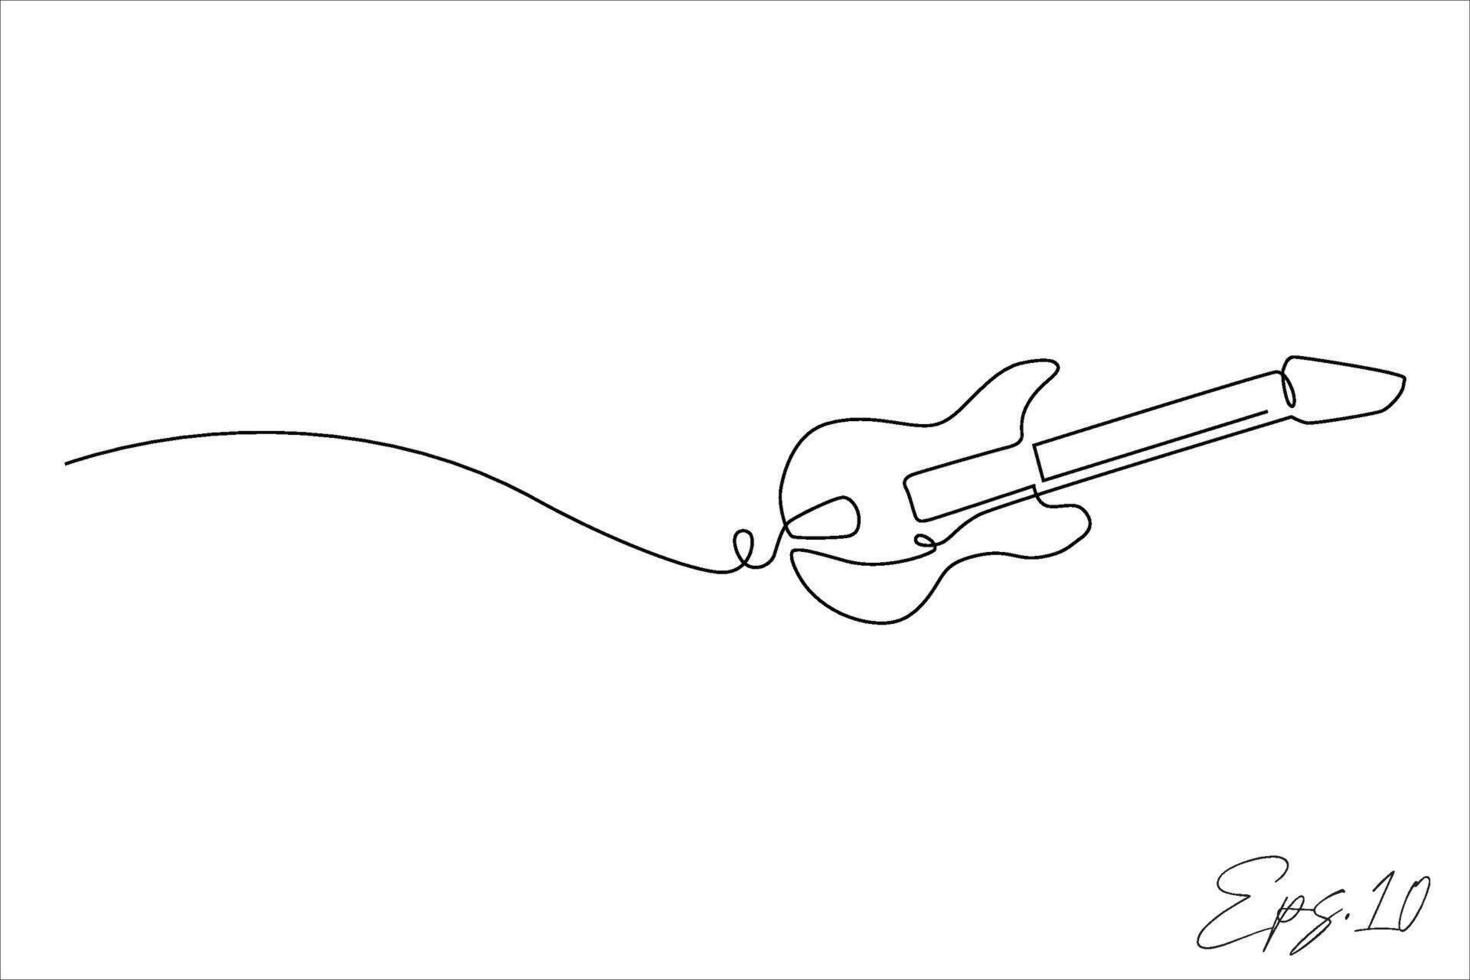 continuous line vector illustration of an electric guitar